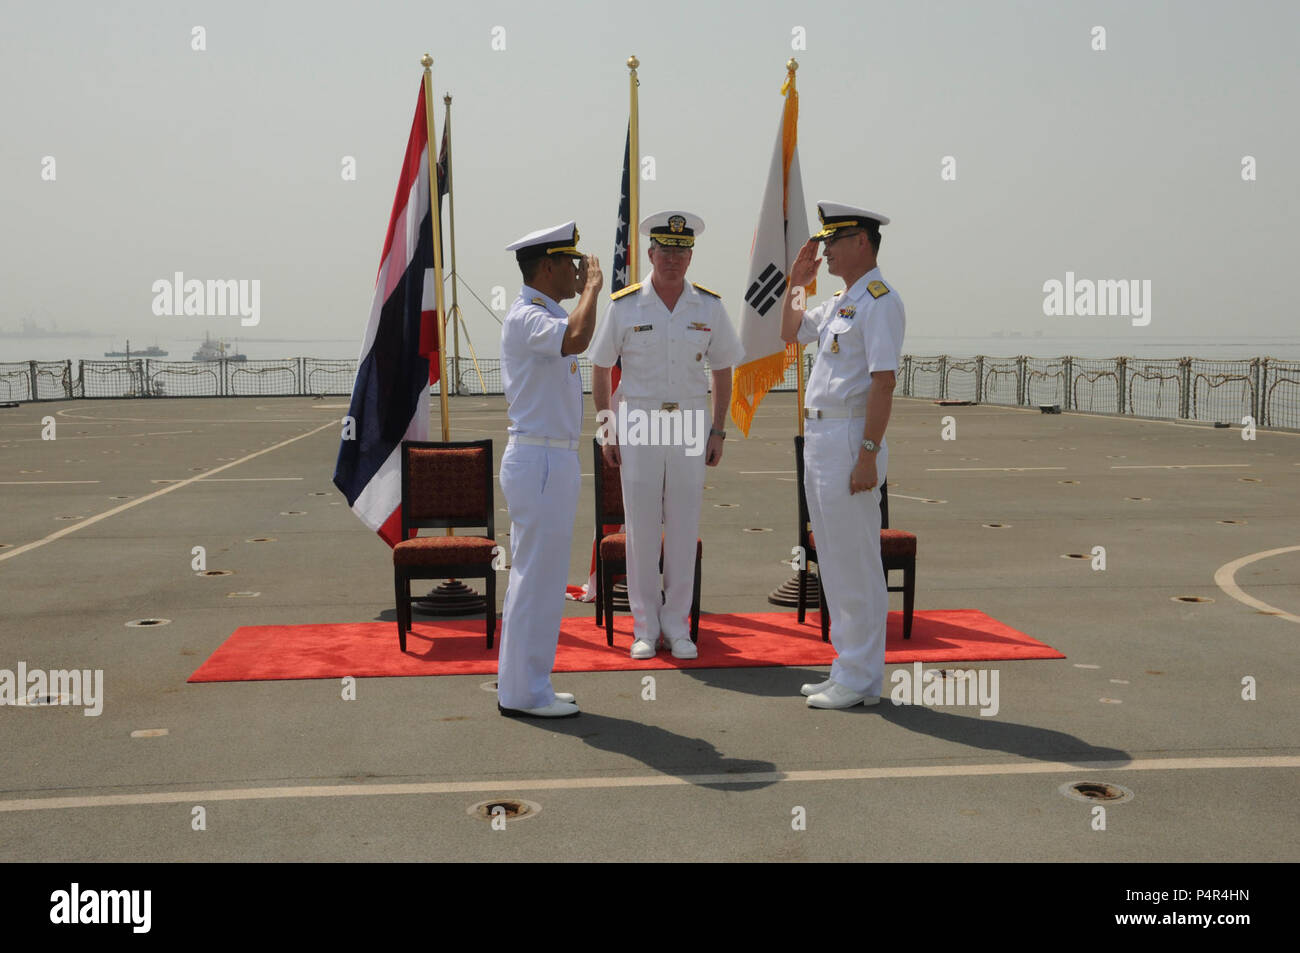 MINA SALMAN PIER, Bahrain (June 18, 2012) Republic of Korea Navy Rear Adm. Anho Chung, relieves, Royal Thai Navy Rear Adm. Tanin Likitawong, commander, Combined Task Force (CTF) 151 while Vice Adm. John. Miller, commander, U.S. Naval Forces Central Command/Fifth Fleet/Combined Maritime Forces, center, observes, during change of command ceremony aboard Royal Fleet Auxiliary (RFA) Fort Victoria (A387). CTF 151 is a multi-national, mission-based task force working under CMF, to conduct counter-piracy operations in the Southern Red Sea, Gulf of Aden, Somali Basin, Arabian Sea, and Indian Ocean. Stock Photo